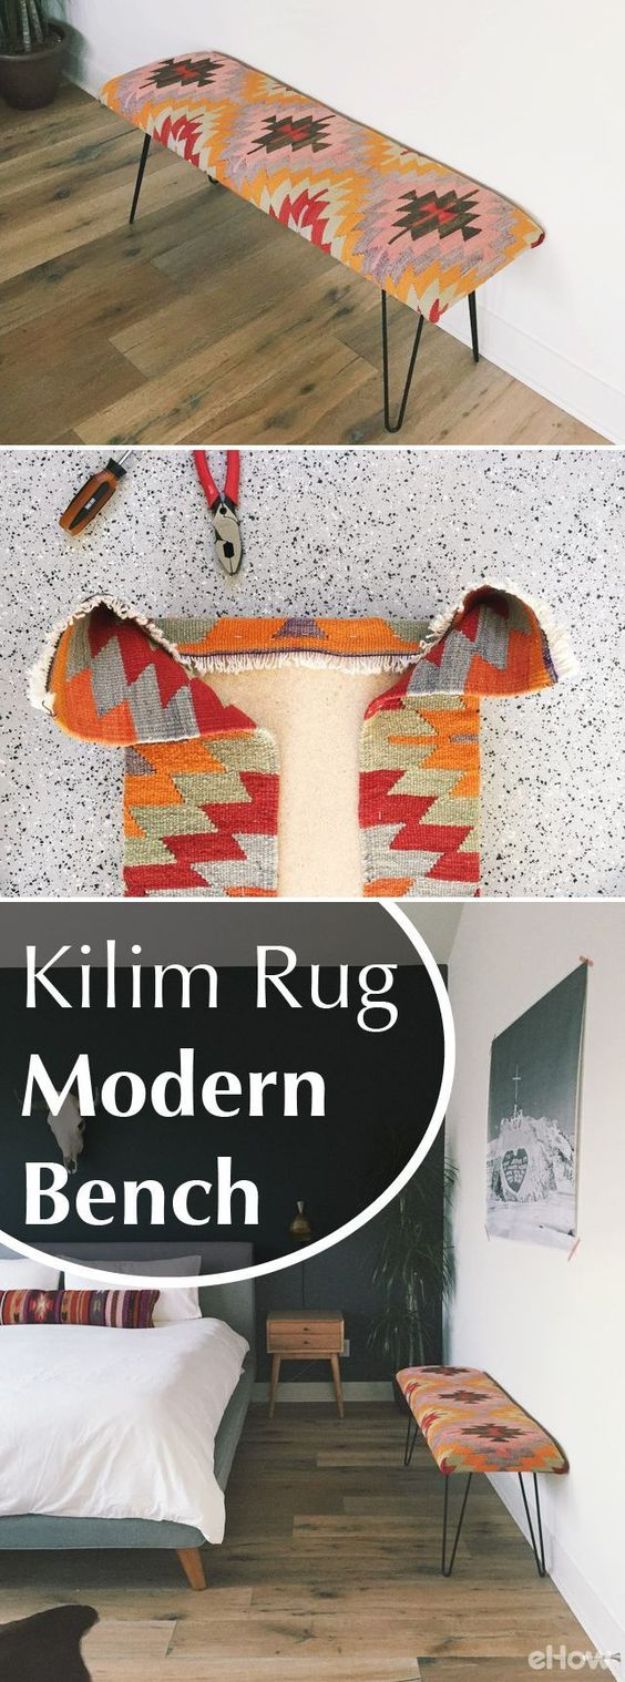 DIY Modern Home Decor - Kilim Rug Modern Bench - Room Ideas, Wall Art on A Budget, Farmhouse Style Projects - Easy DIY Ideas and Decorations for Apartments, Living Room, Bedroom, Kitchen and Bath - Fixer Upper Tips and Tricks 